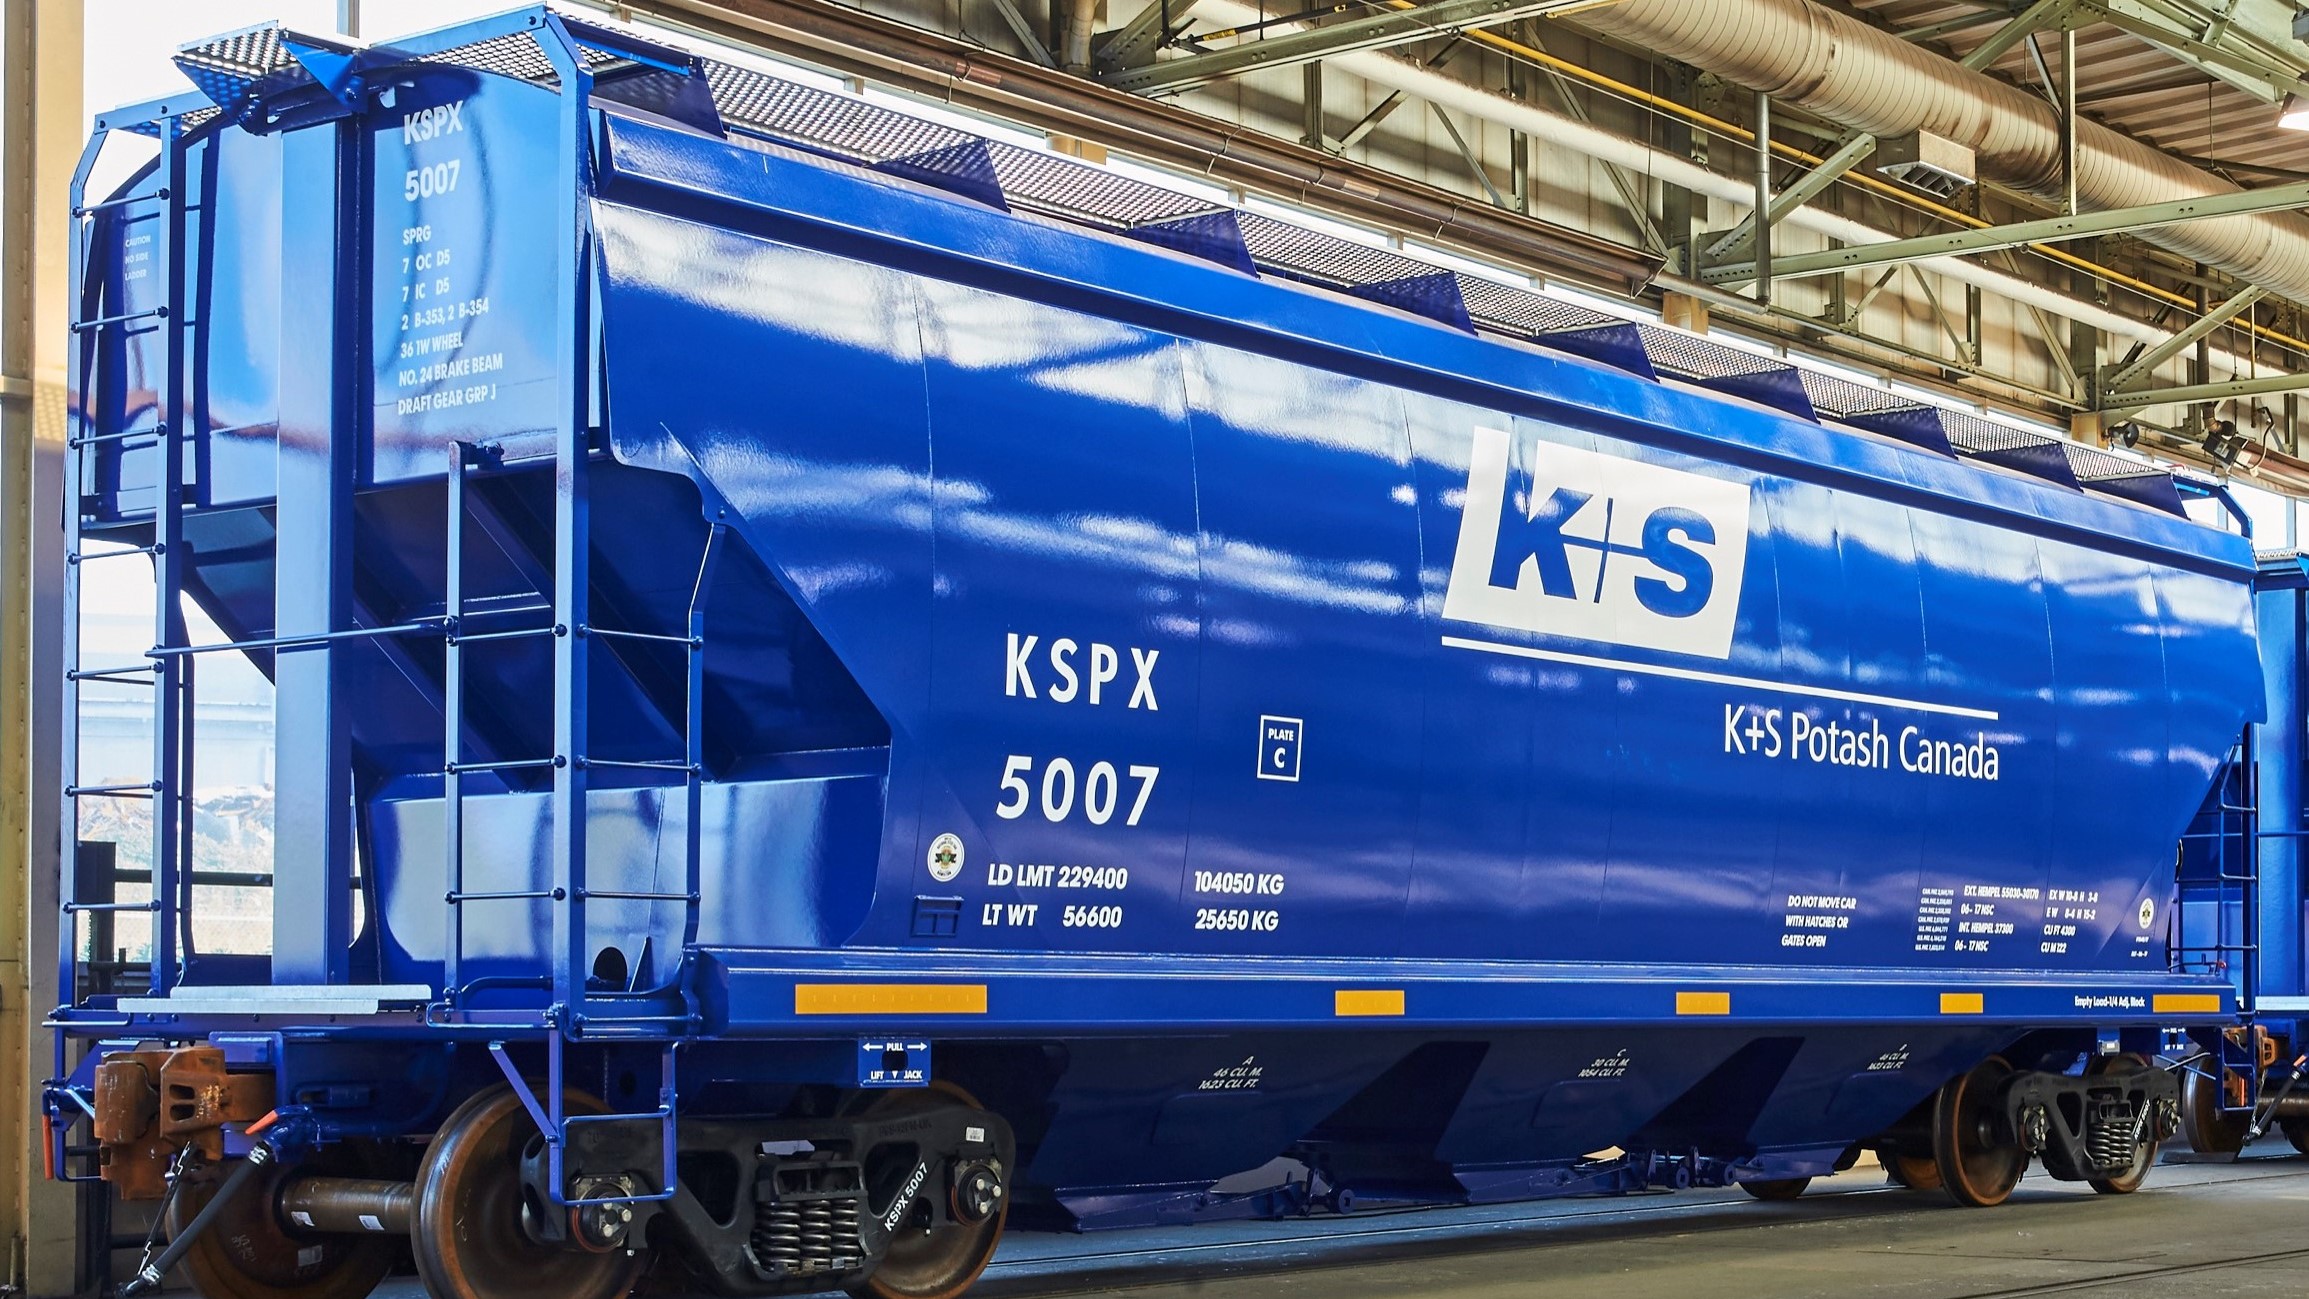 In total 250 of the blue KSPC rail cars operate between the Bethune Mine and the locations in Canada and the U.S. 